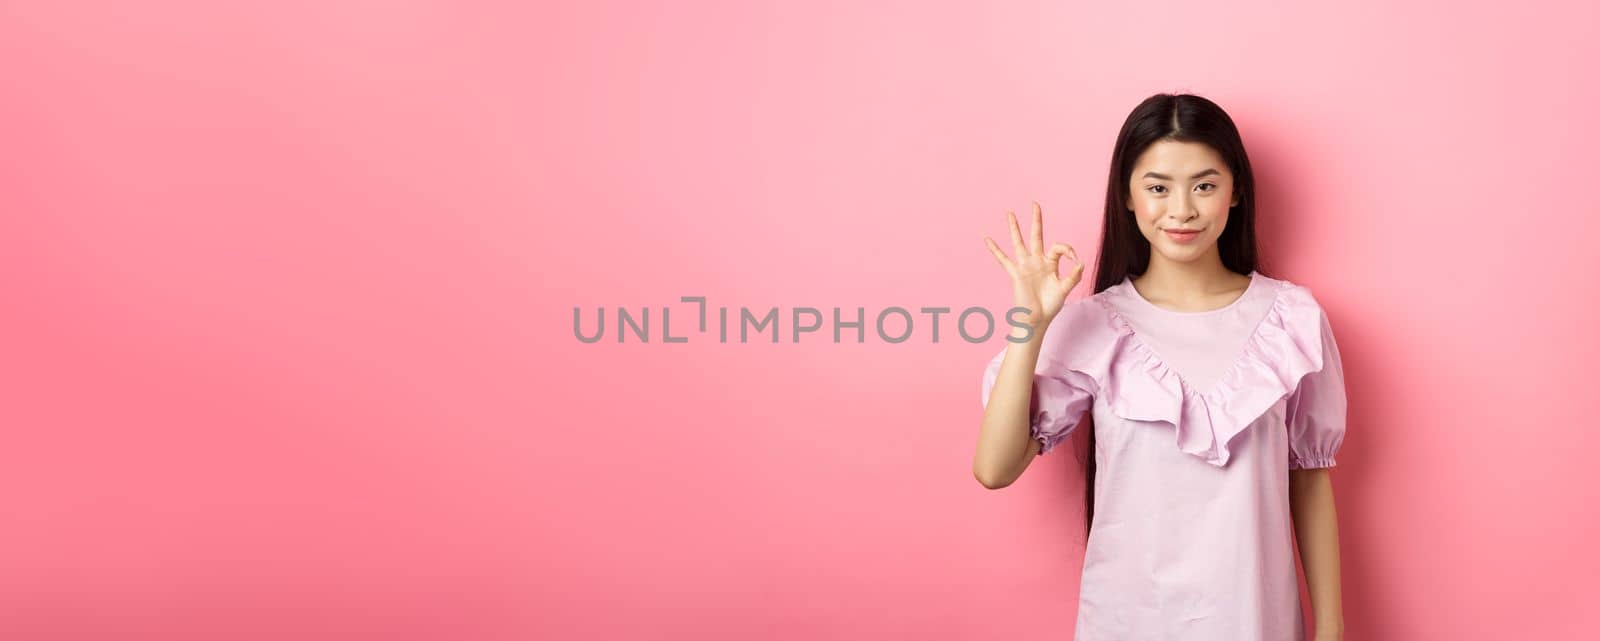 Smiling asian woman in dress showing okay sign, praise and compliment good thing, approve excellent choice, standing on pink background.